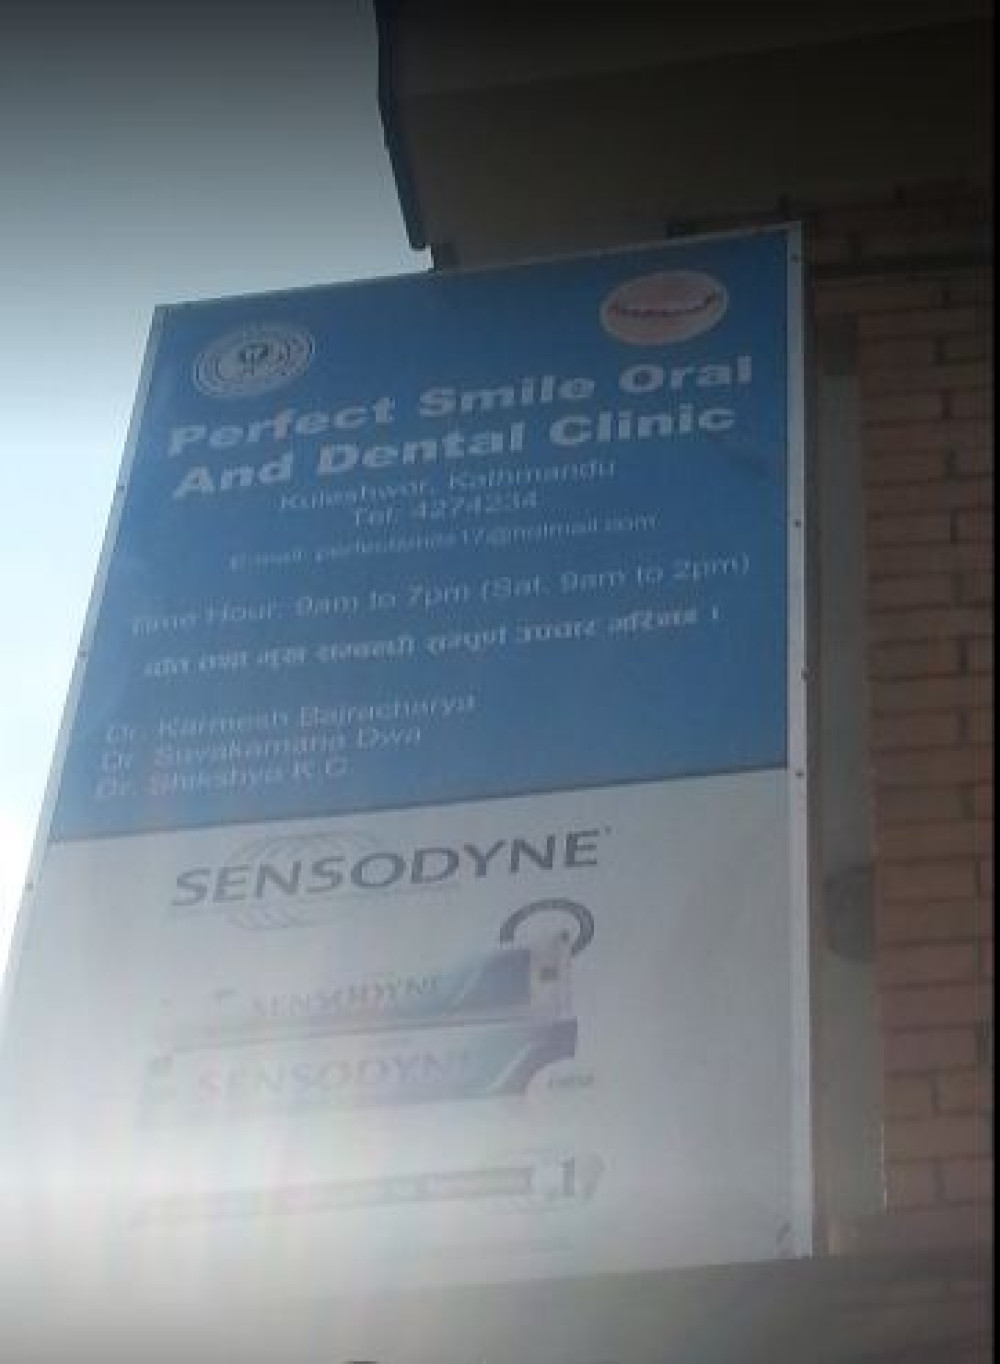 PERFECT SMILE ORAL & DENTAL CLINIC